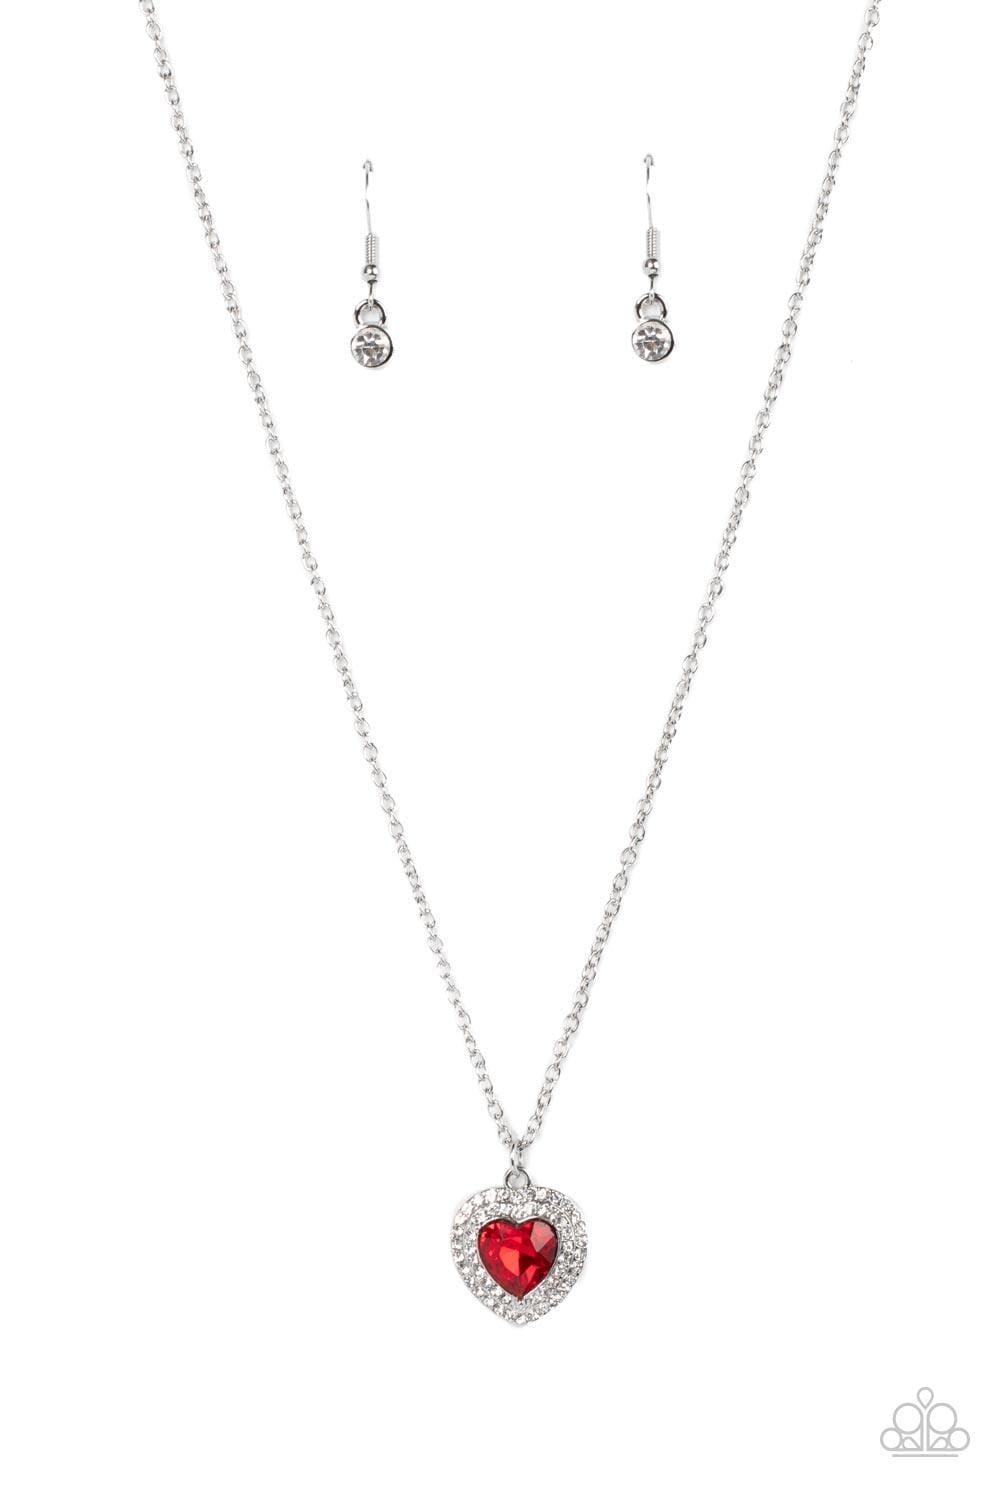 Radiant Reflections Red Necklace | Paparazzi Accessories | $5.00